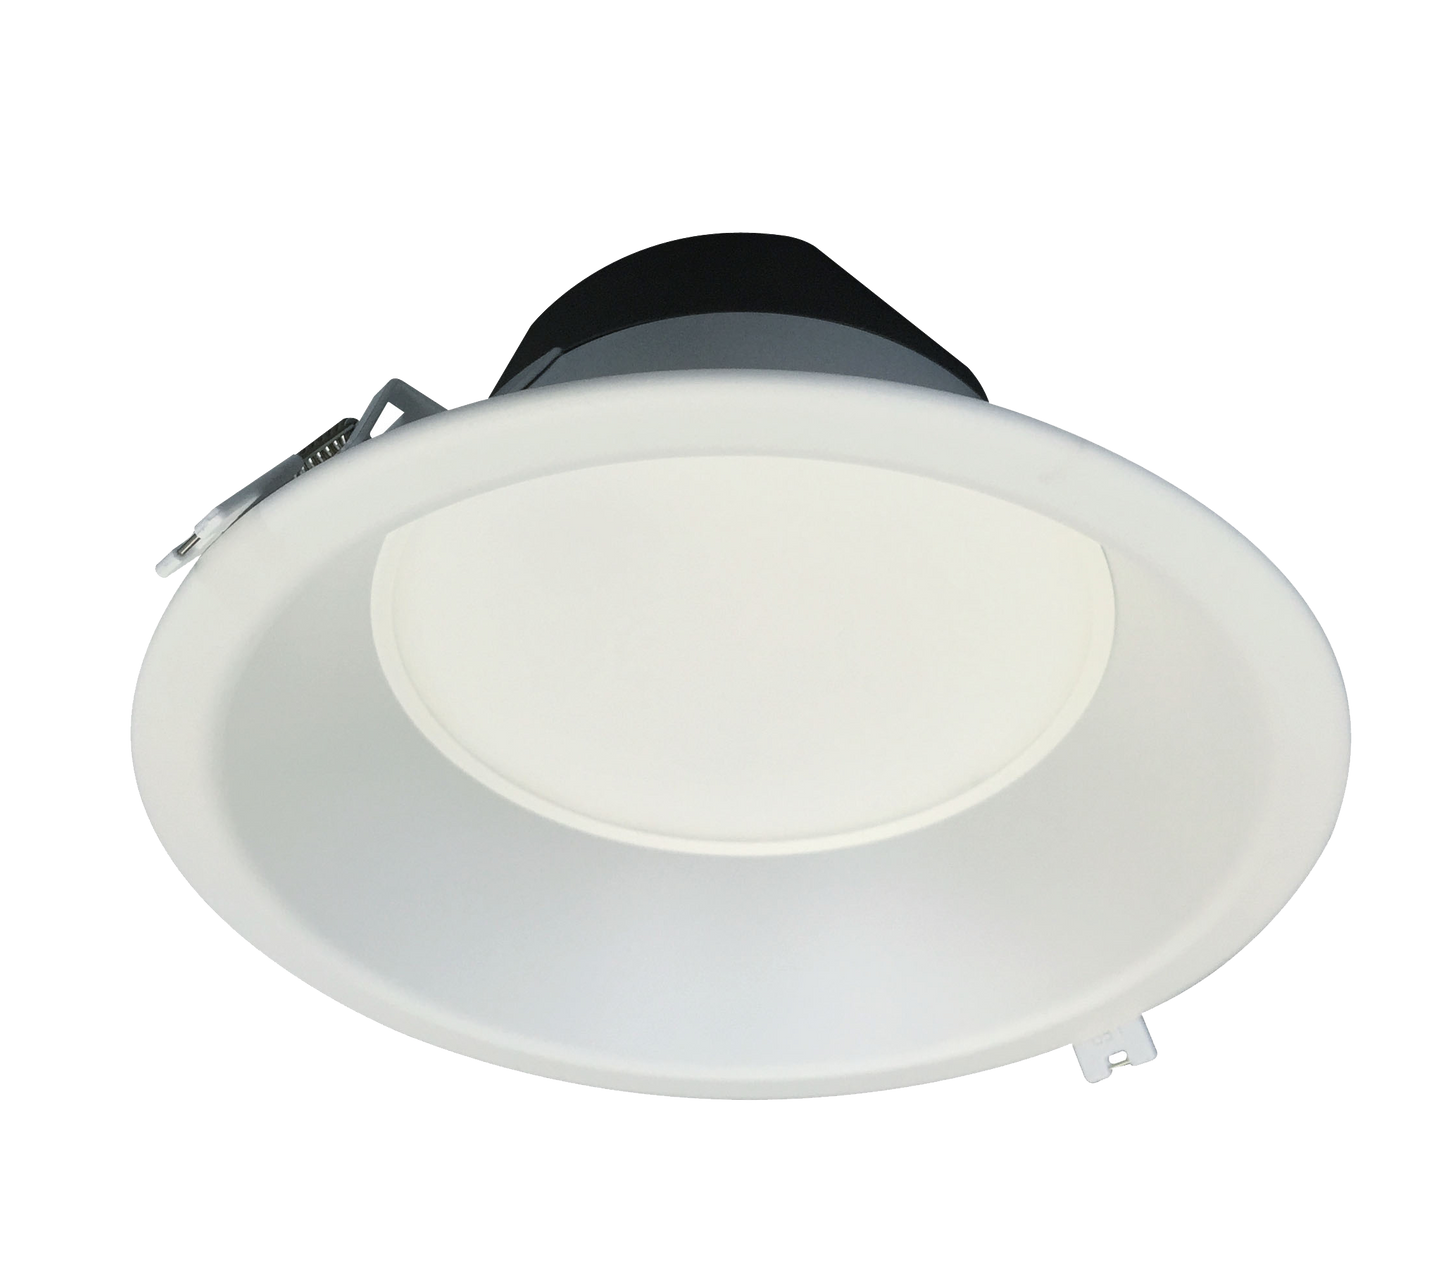 LED downlight 21W 860 recessed dimmable 